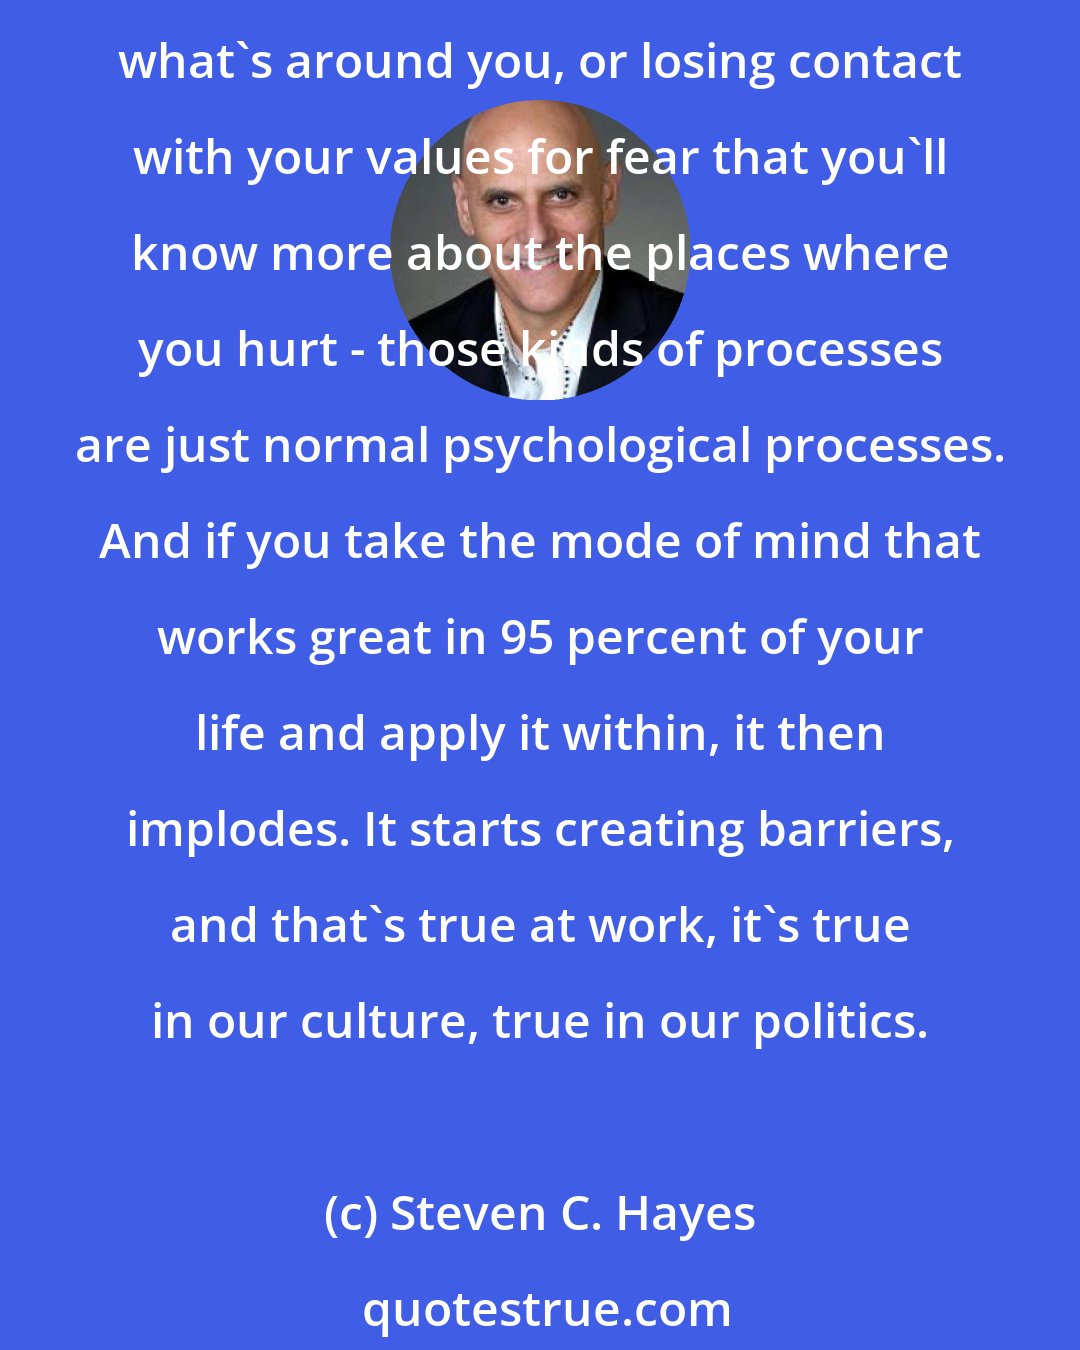 Steven C. Hayes: Processes of avoiding the world within in order to try to regulate your behavior, or becoming entangled in your thoughts interfering with your ability to take advantage of what's around you, or losing contact with your values for fear that you'll know more about the places where you hurt - those kinds of processes are just normal psychological processes. And if you take the mode of mind that works great in 95 percent of your life and apply it within, it then implodes. It starts creating barriers, and that's true at work, it's true in our culture, true in our politics.